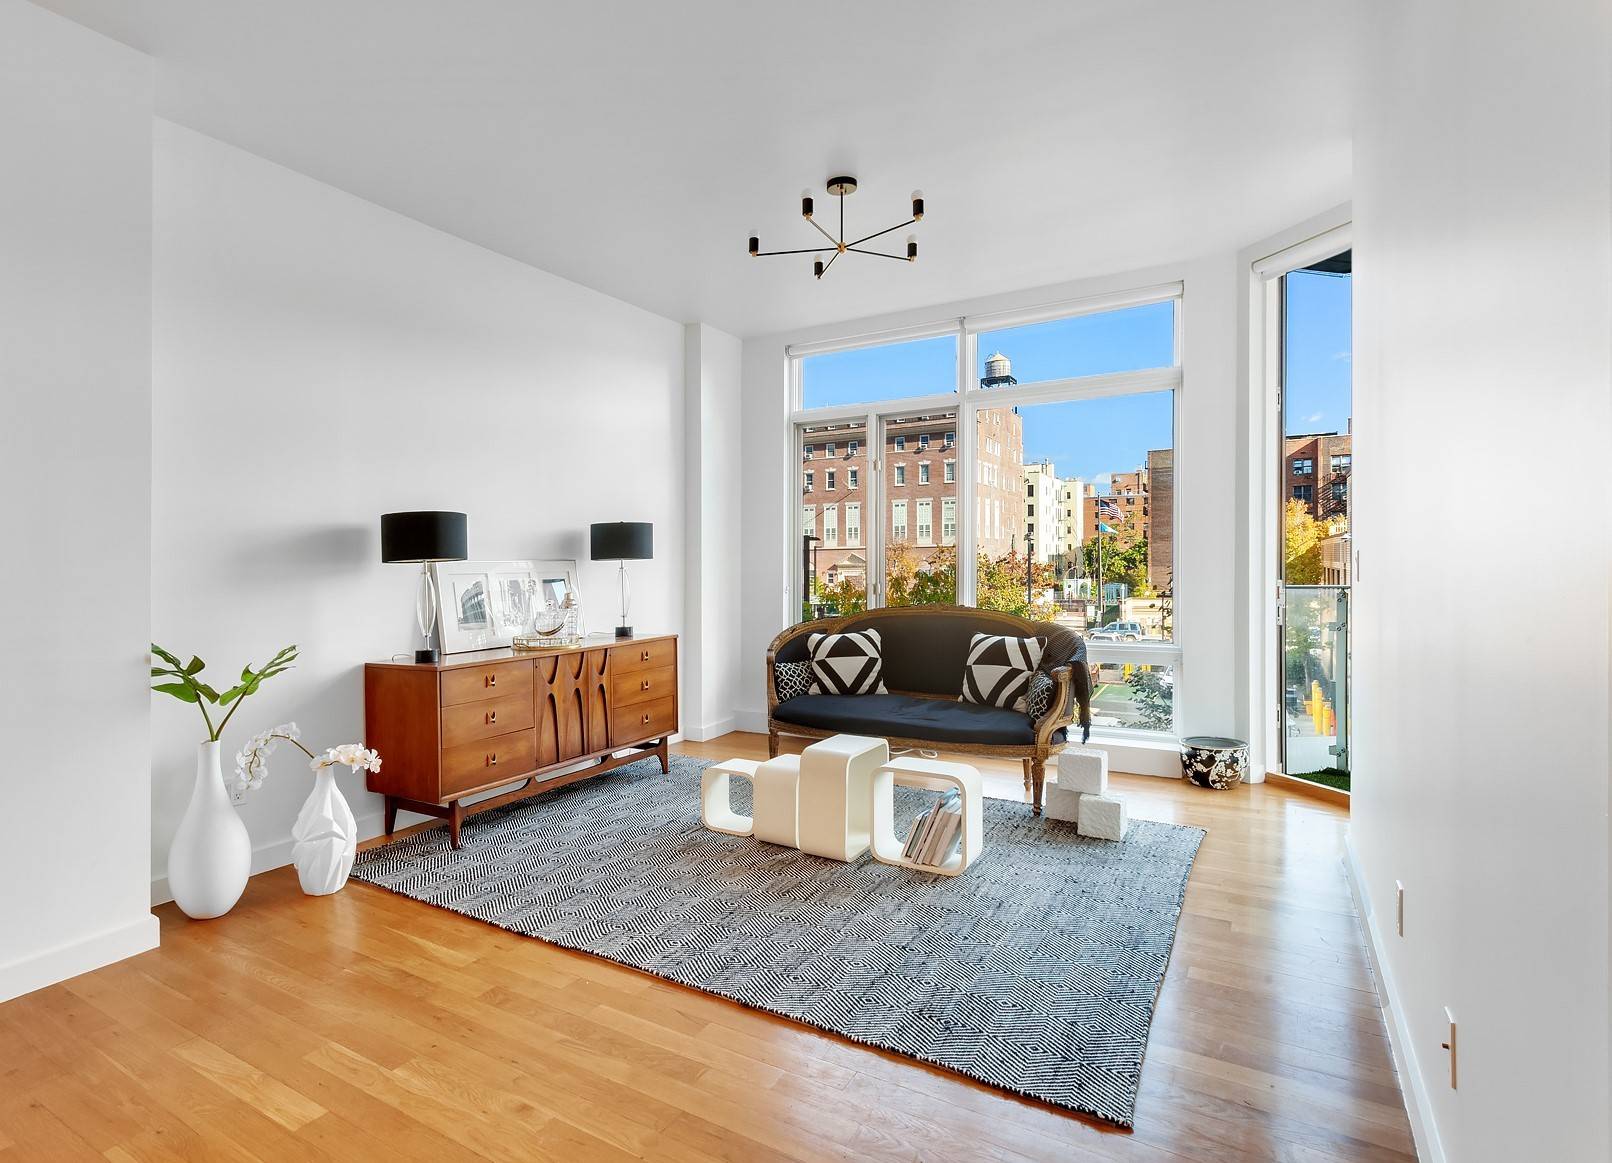 Stunning one bedroom apartment with open sky views, a private balcony, and floor to ceiling windows.